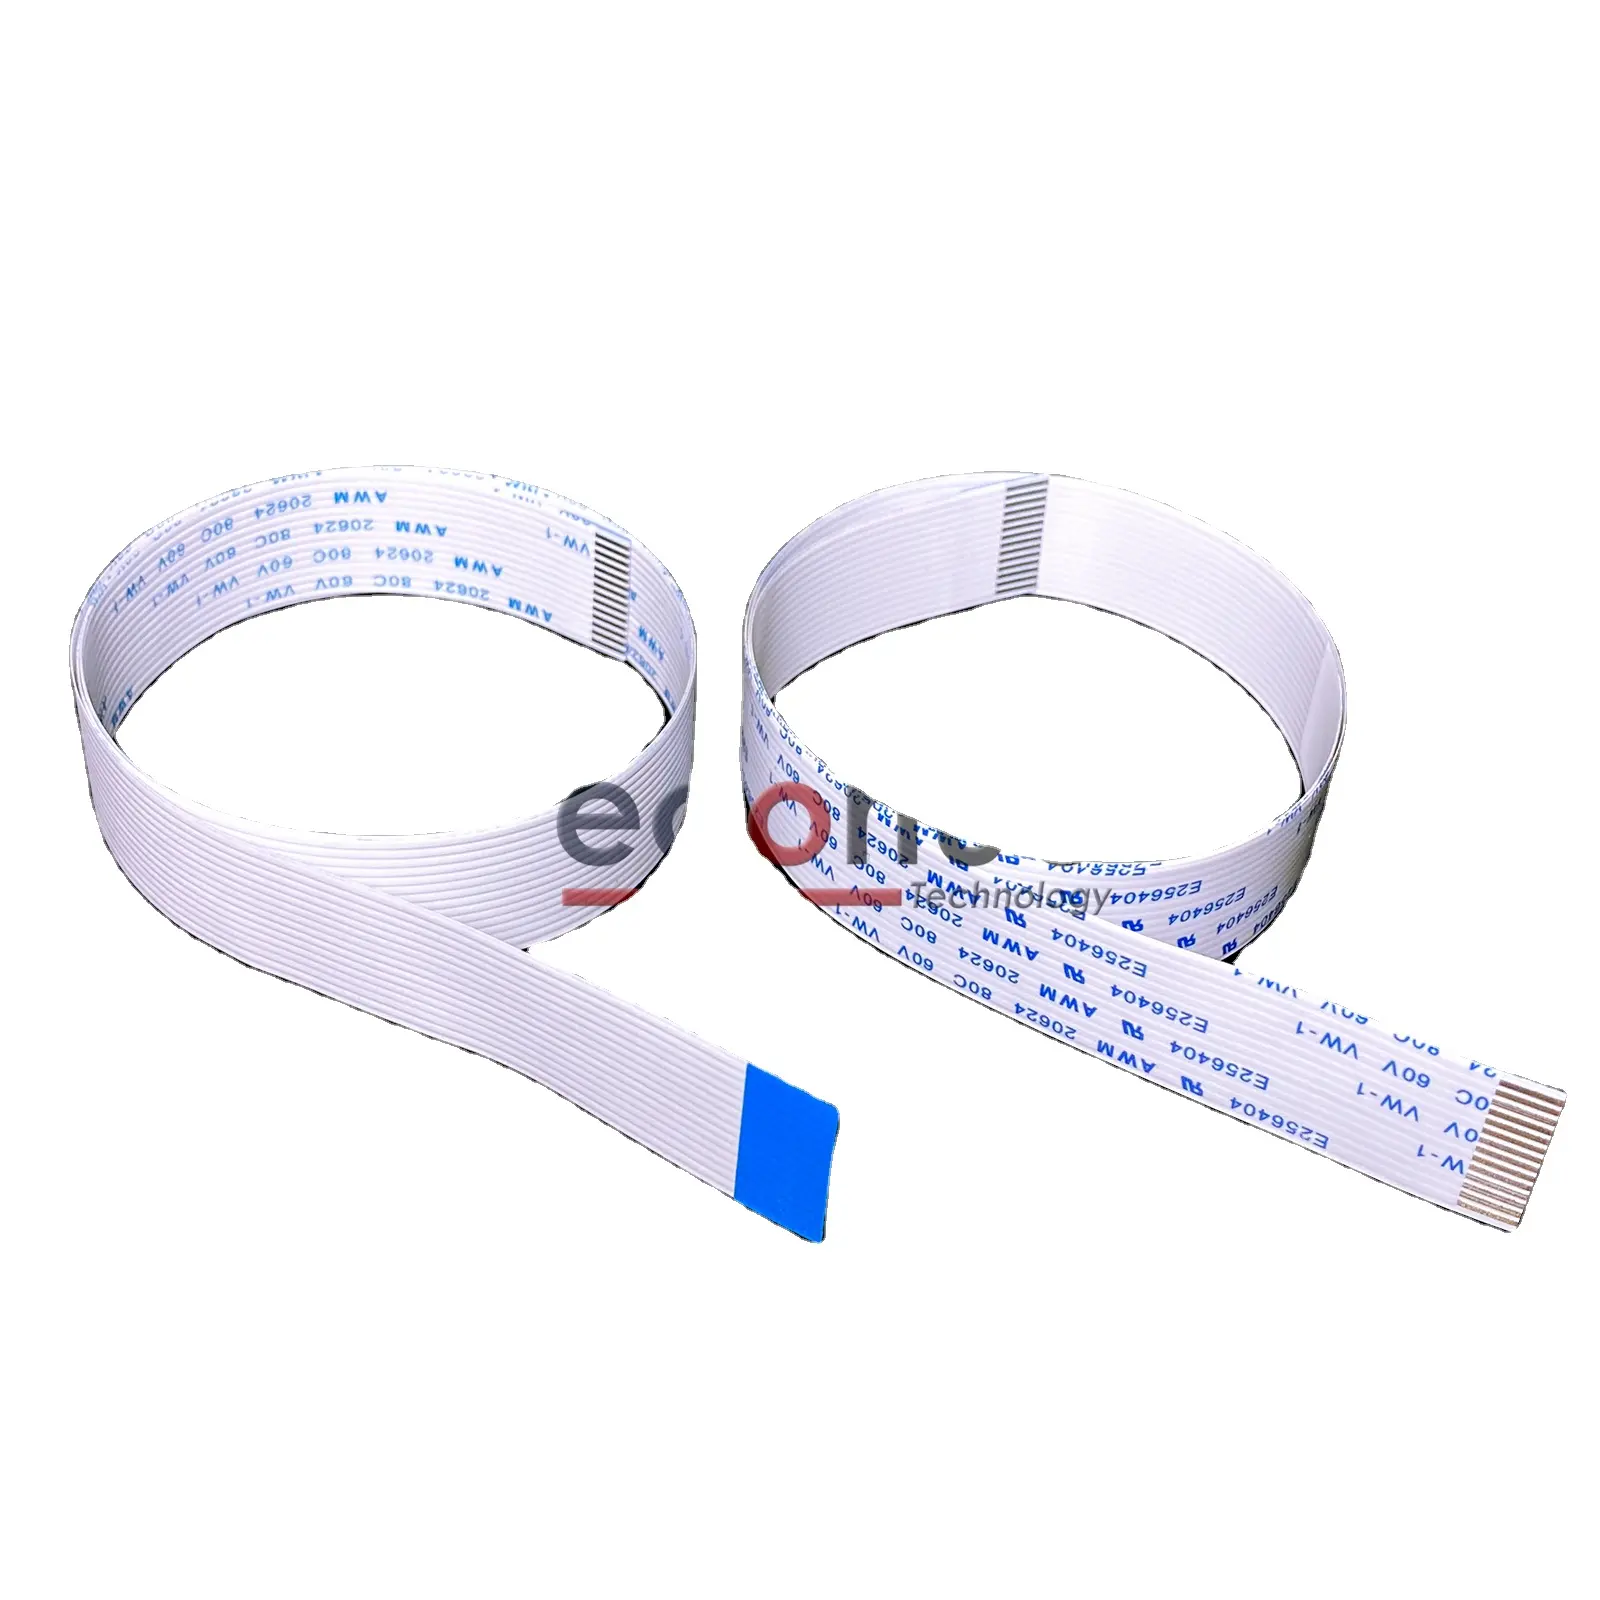 New Style Printer Machinery Parts Epson 14 Pins Data Cable for 4720 i3200 Printhead UV Solvent Printer